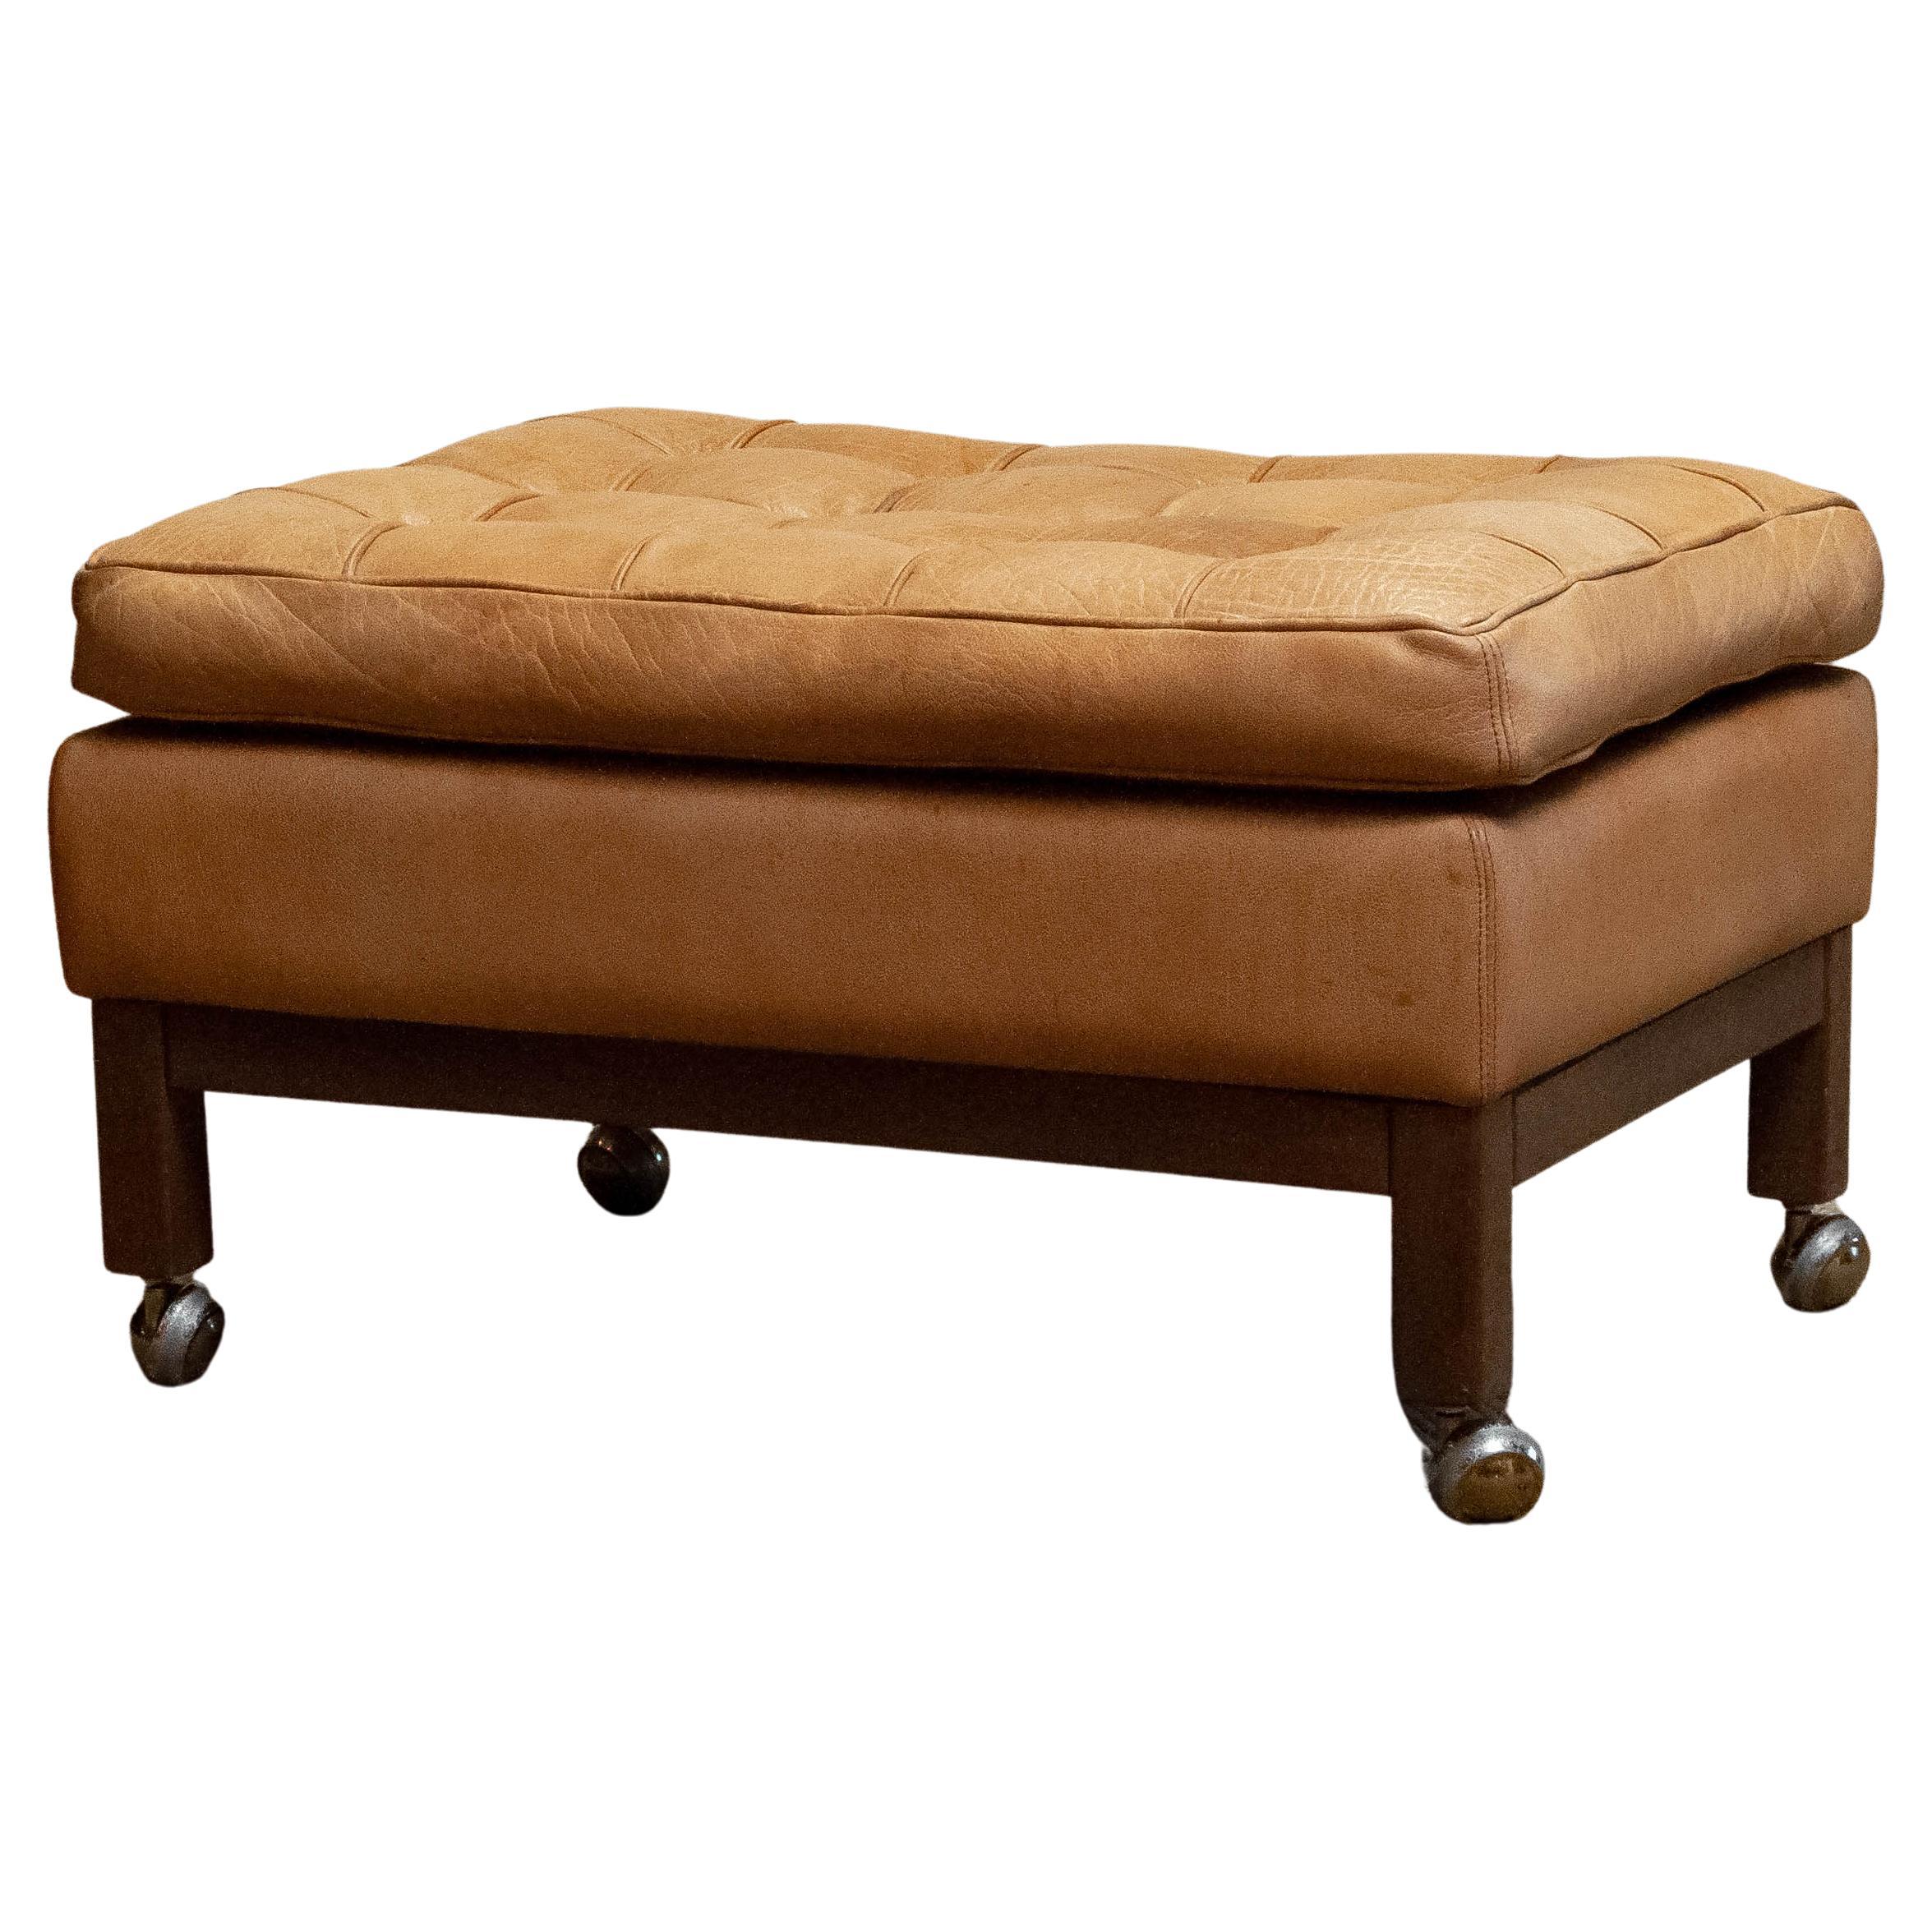 1970s Camel / Brown Colored Leather Ottoman Model 'Merkur' by Arne Norell For Sale